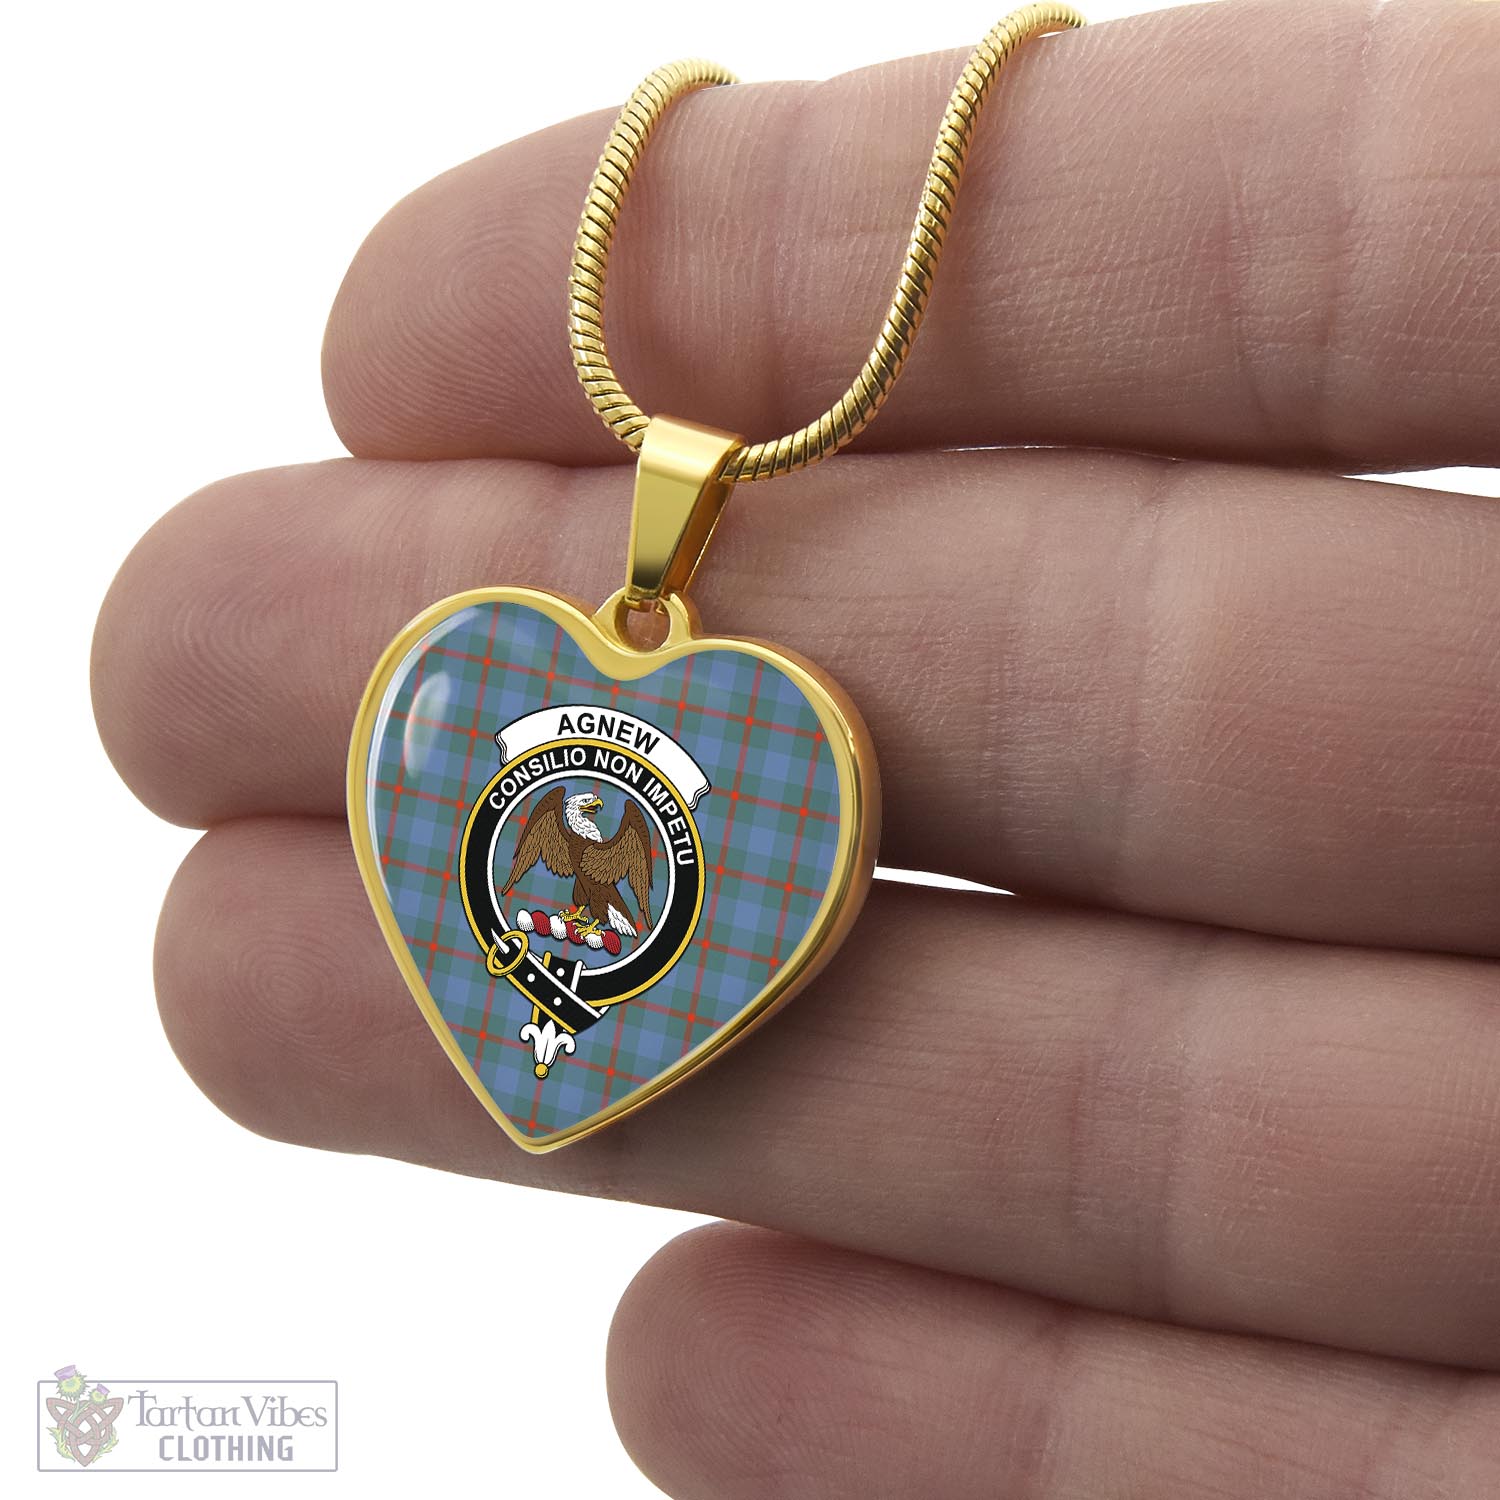 Tartan Vibes Clothing Agnew Ancient Tartan Heart Necklace with Family Crest